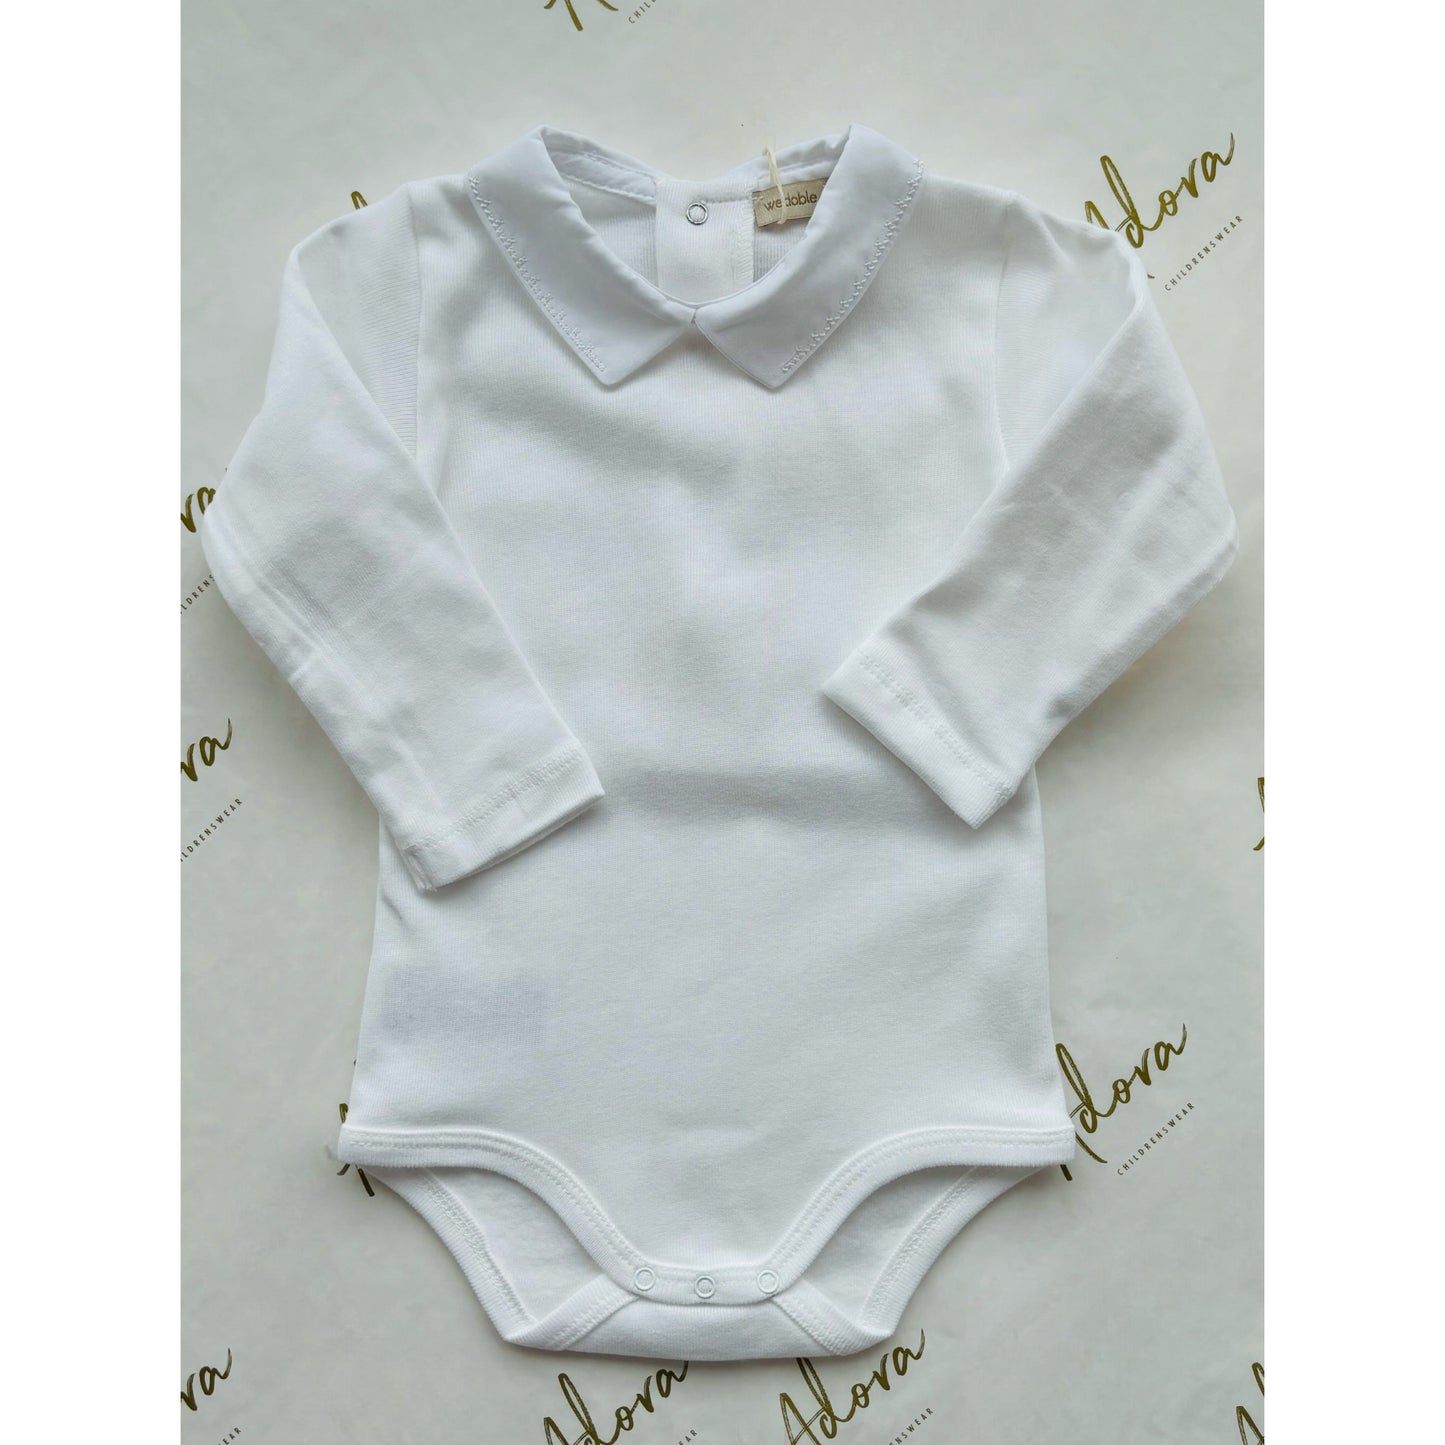 Cotton body suit for babies - Wedoble Baby basics